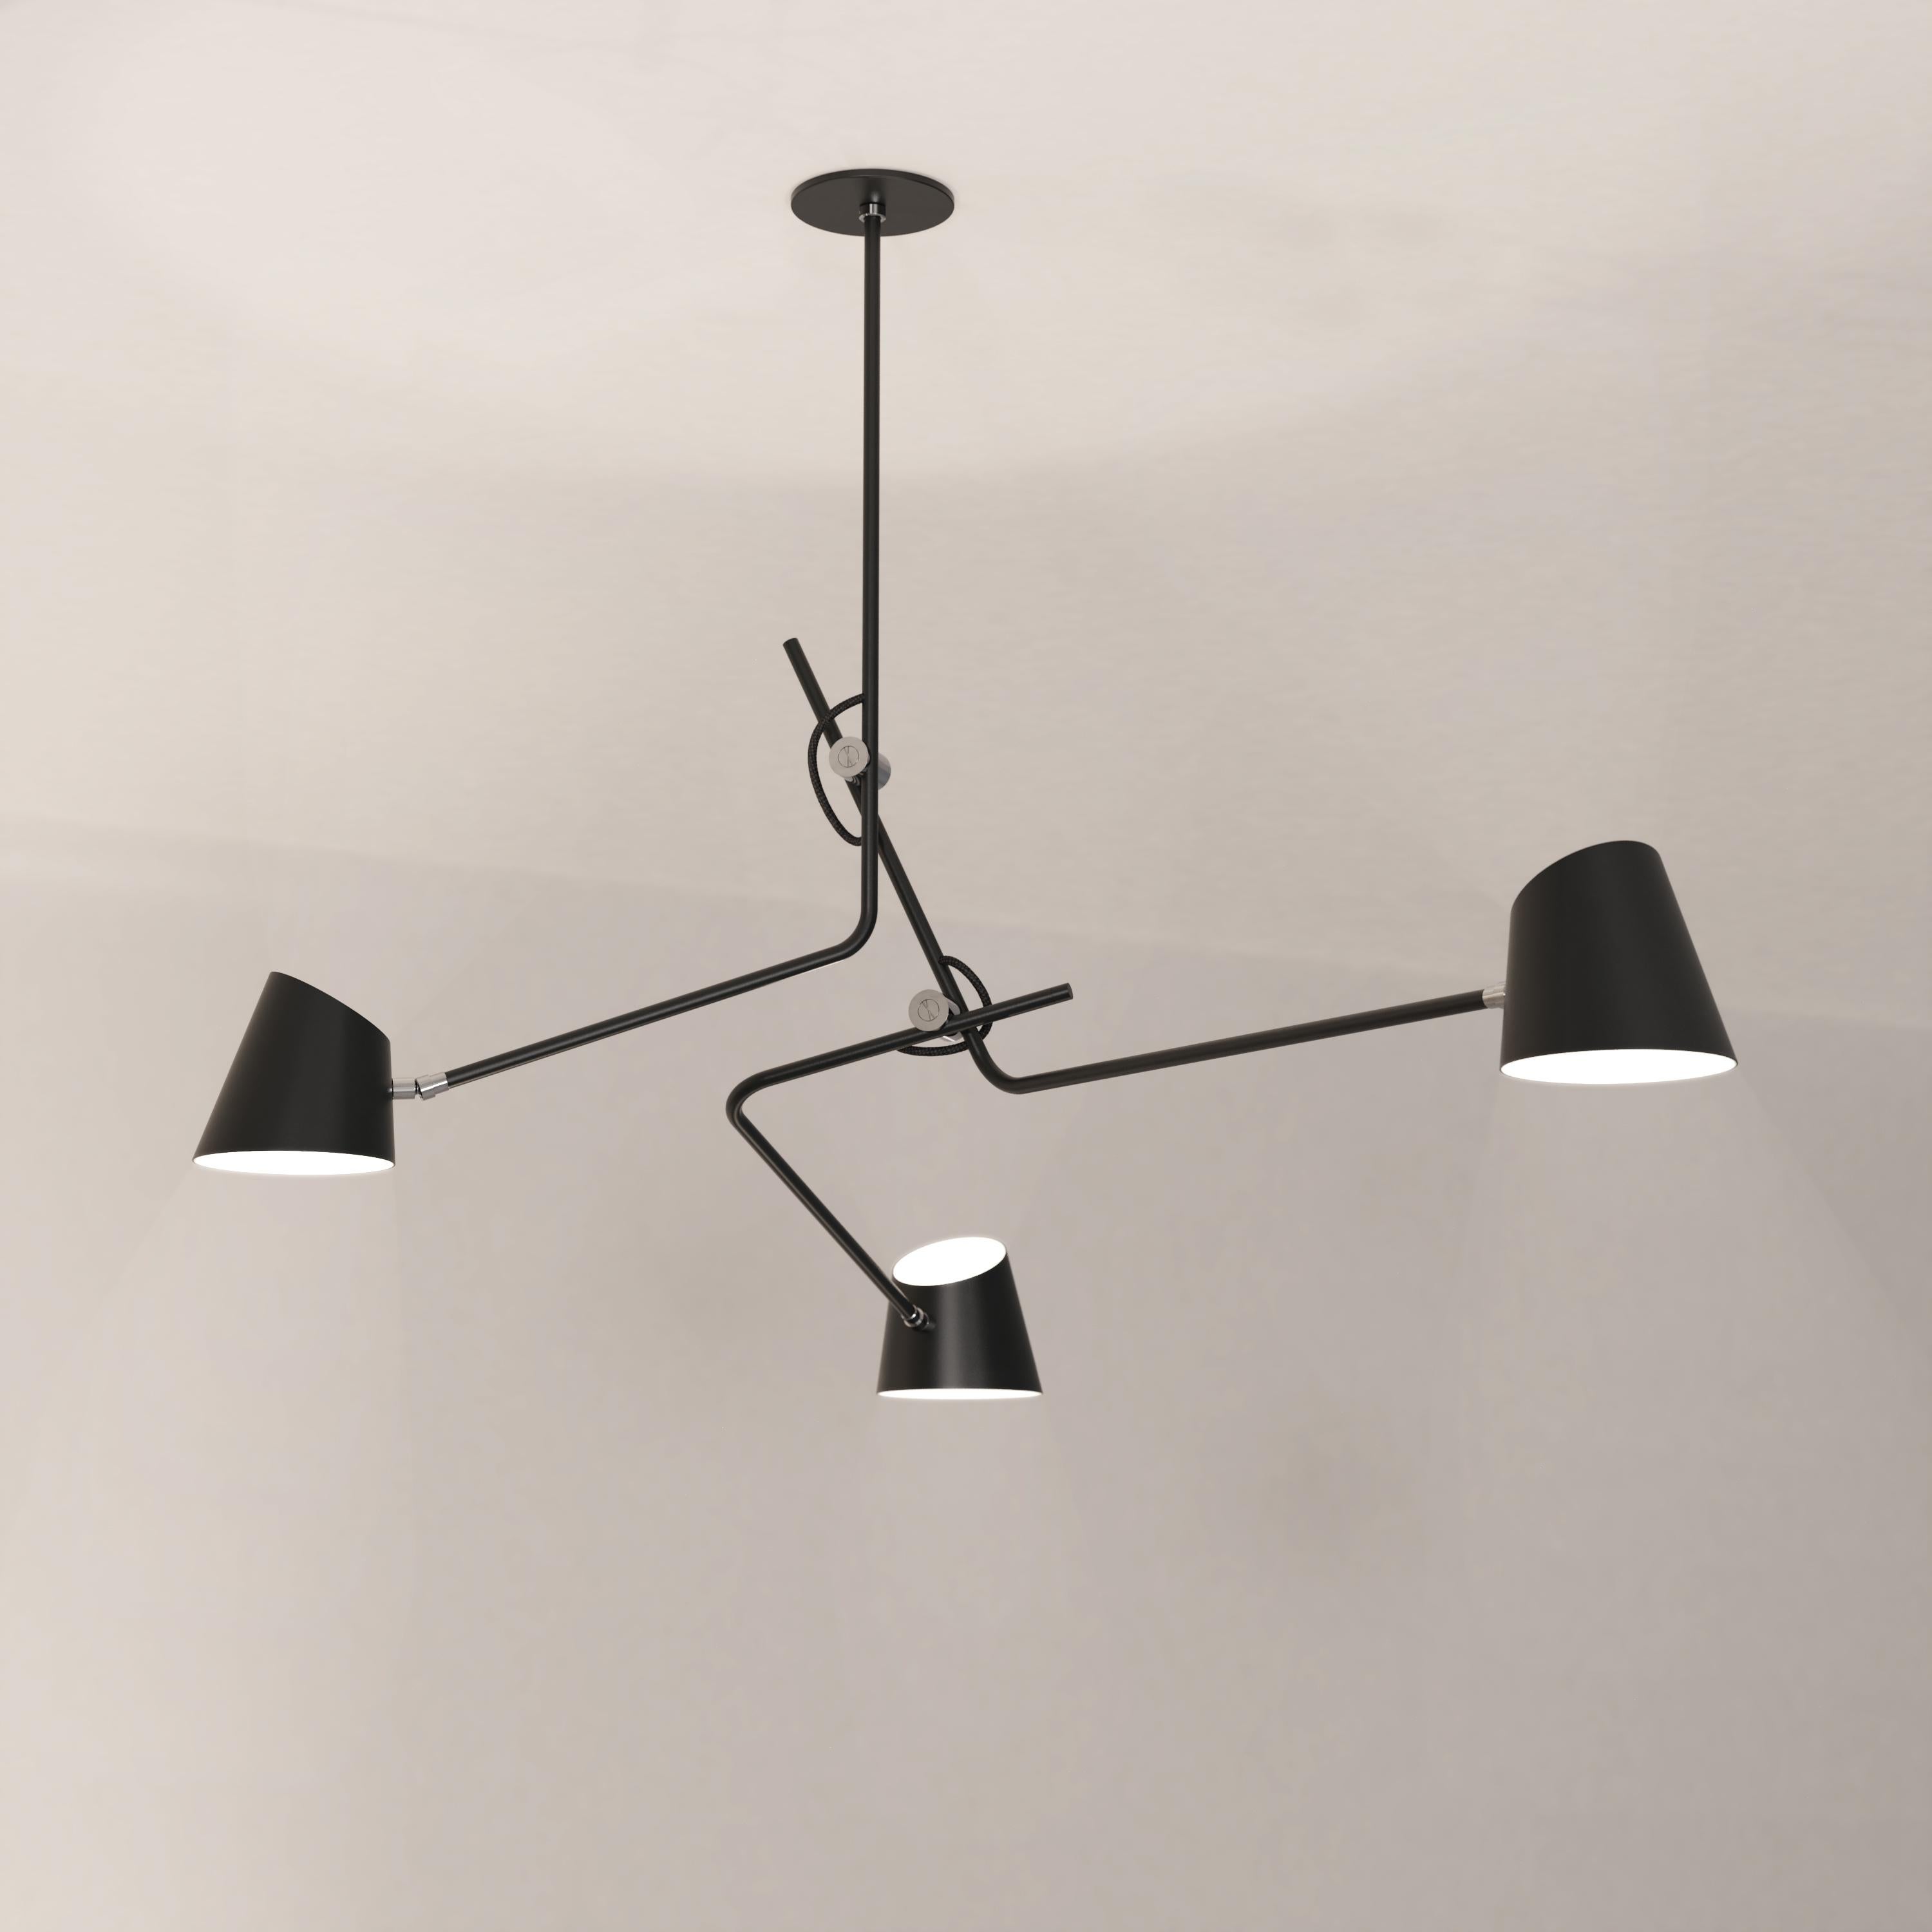 Design by Alexandre Joncas

Hartau Triple is the masterpiece of the collection. With its stunning lines and details it combine lightness and finesse in an impressive montage.

The Hartau collection brings together classical light fittings that are,